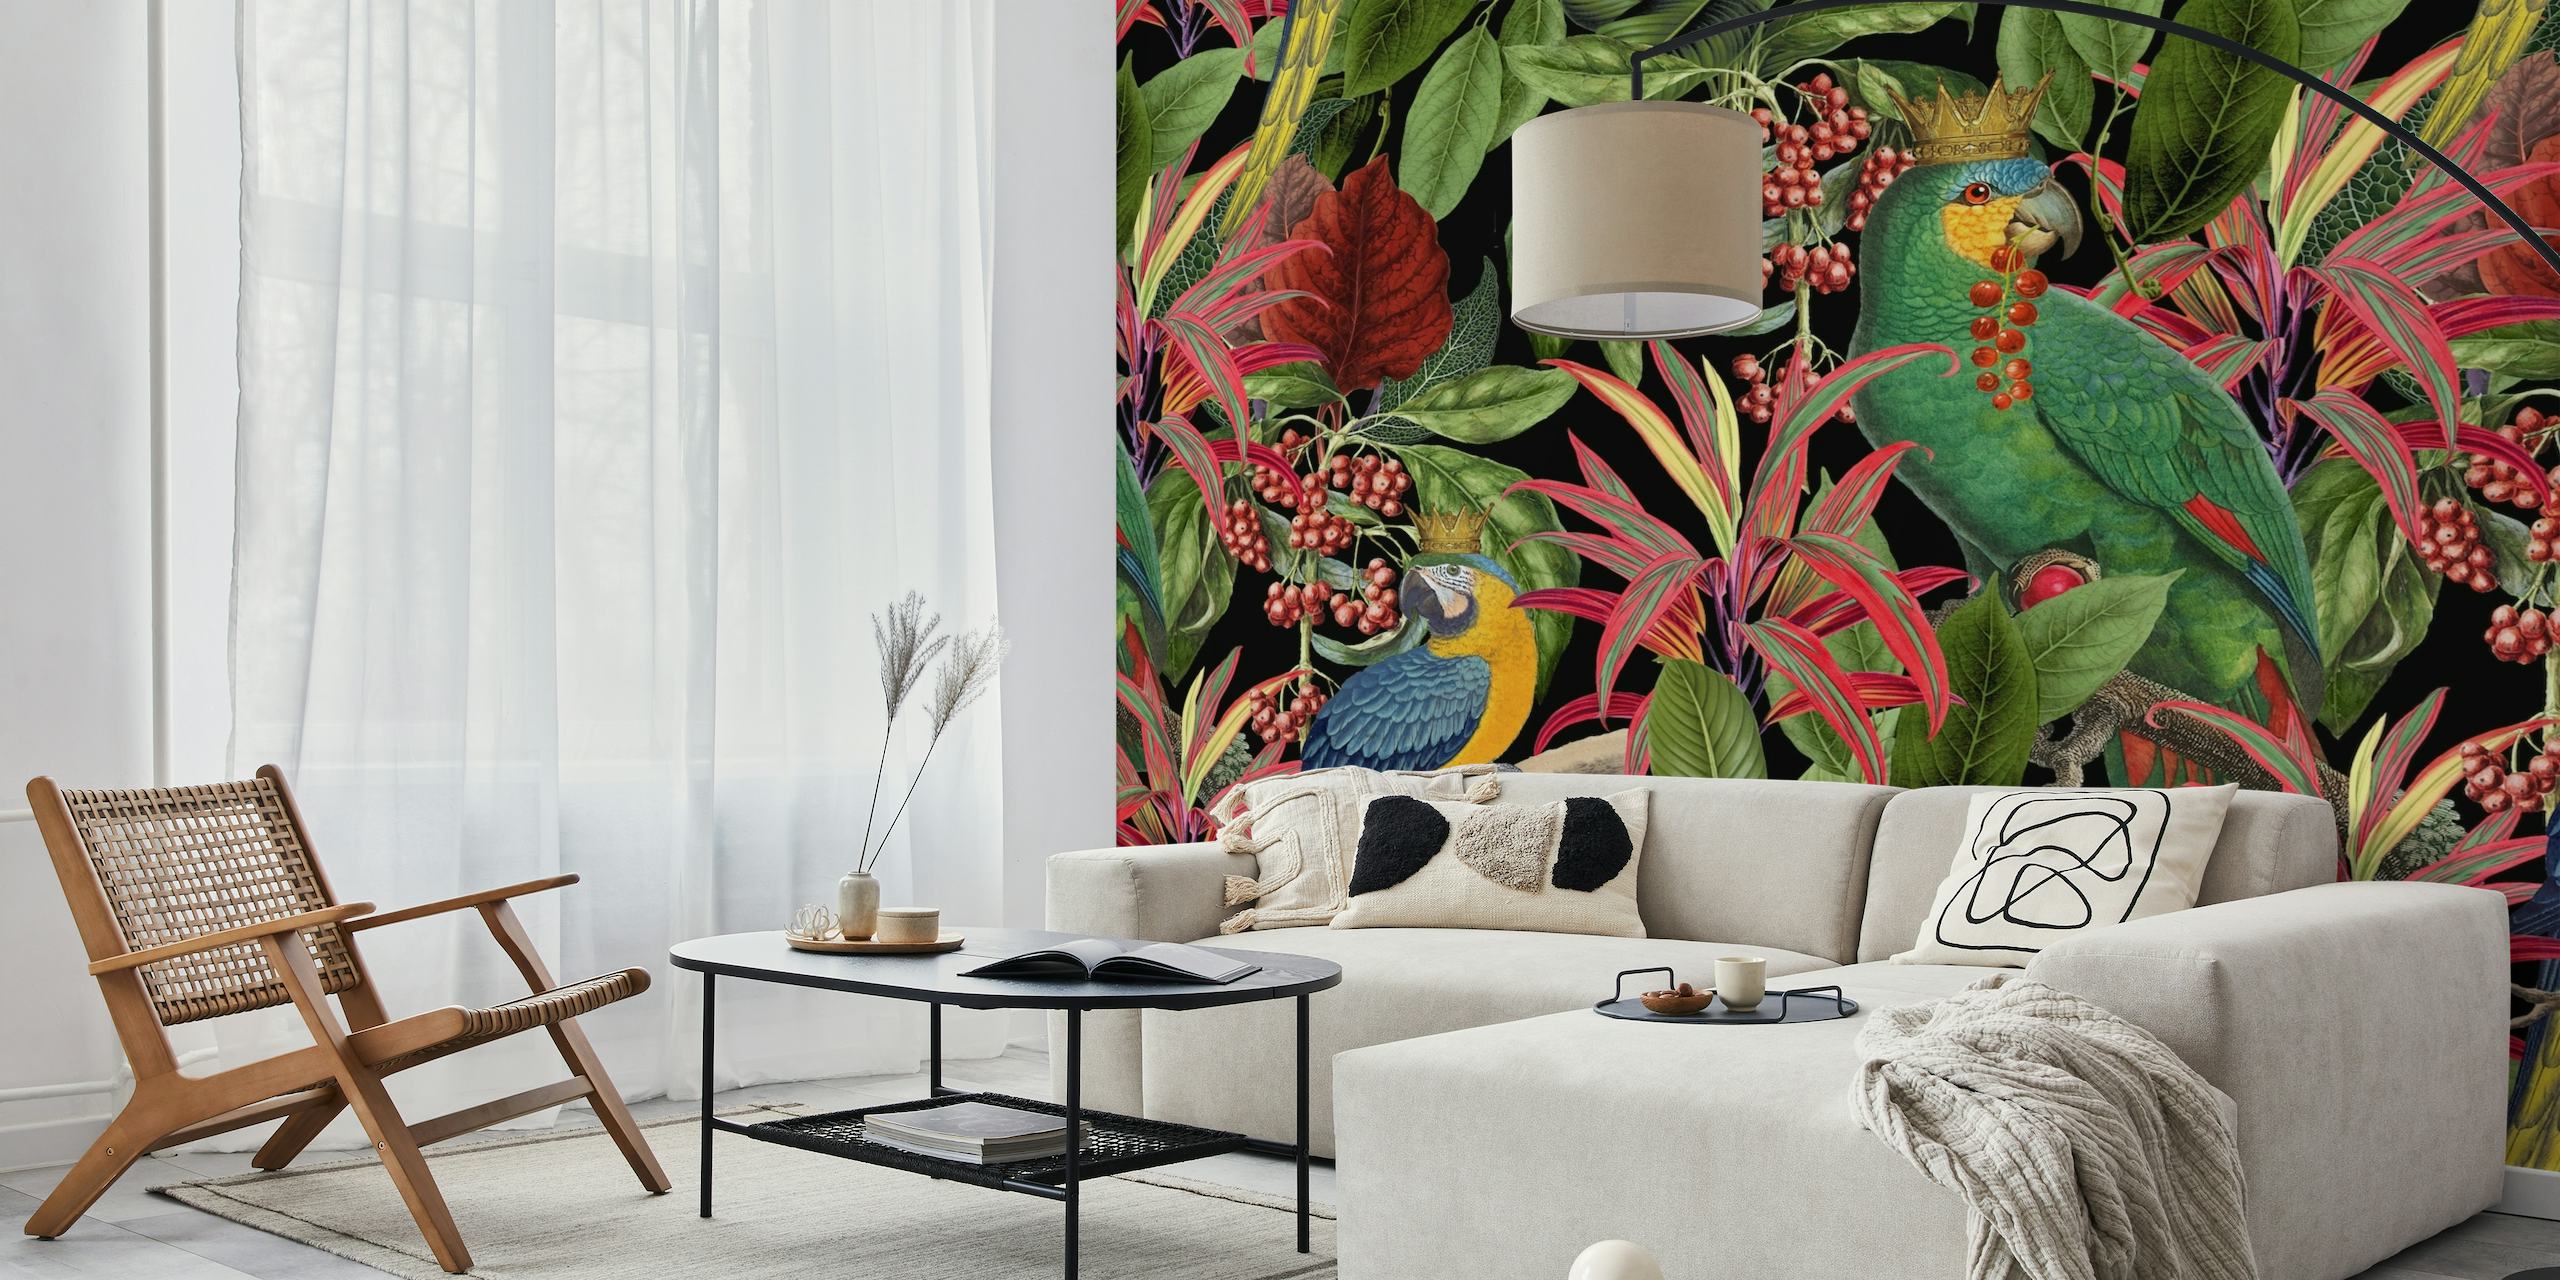 Colorful parrot-themed wall mural in a tropical foliage setting